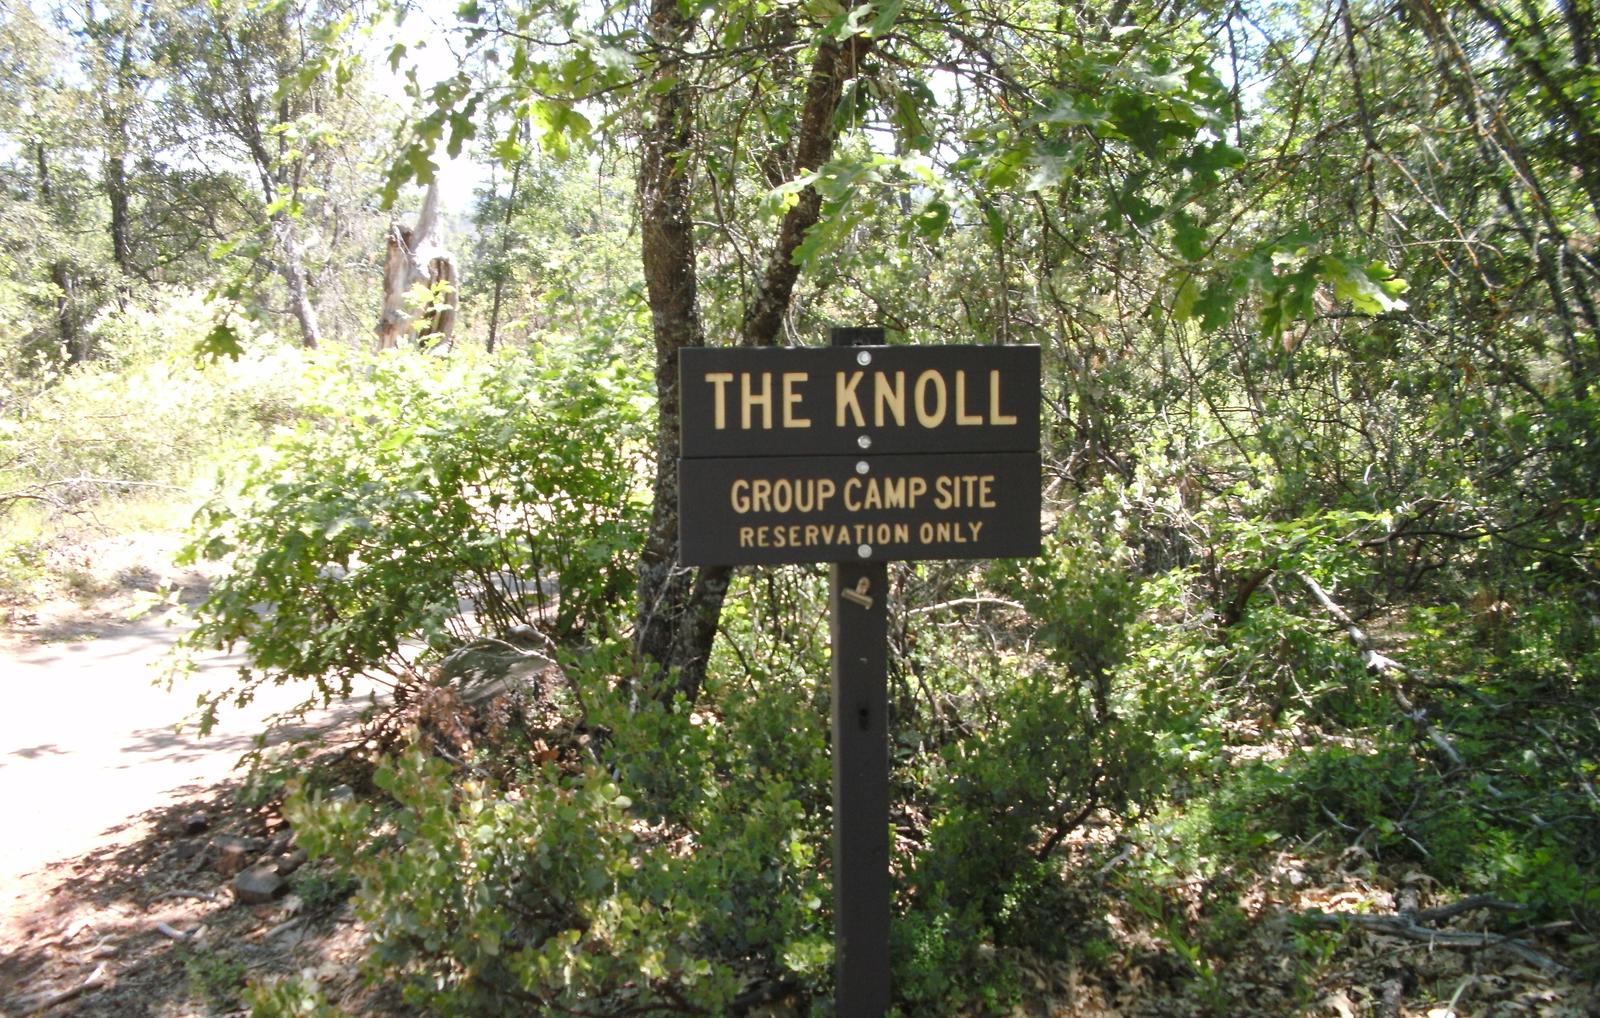 The Knoll Group Camp